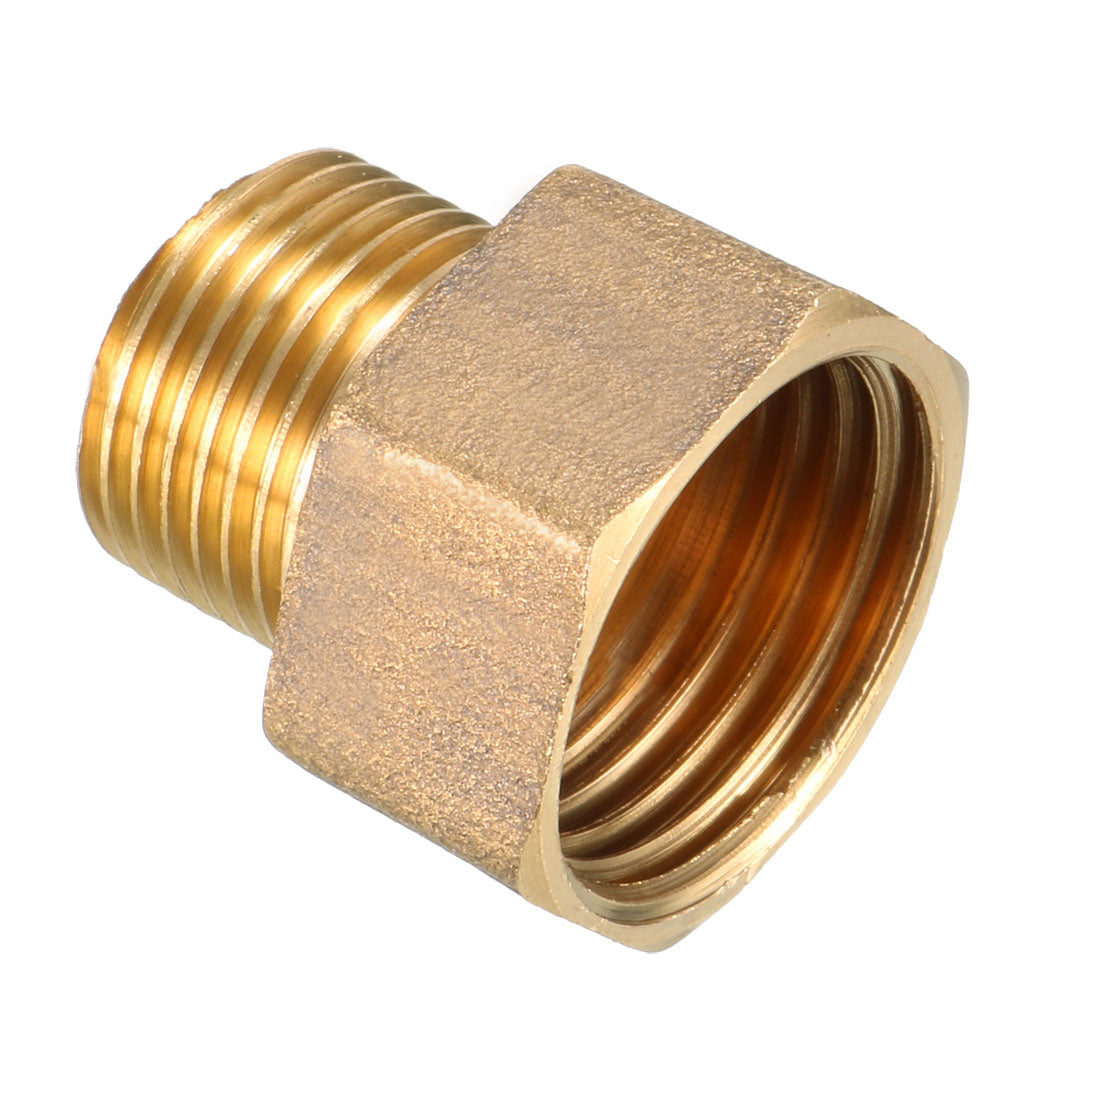 uxcell Uxcell Brass Threaded Pipe Fitting 3/8 PT Male x 1/2 PT Female Coupling